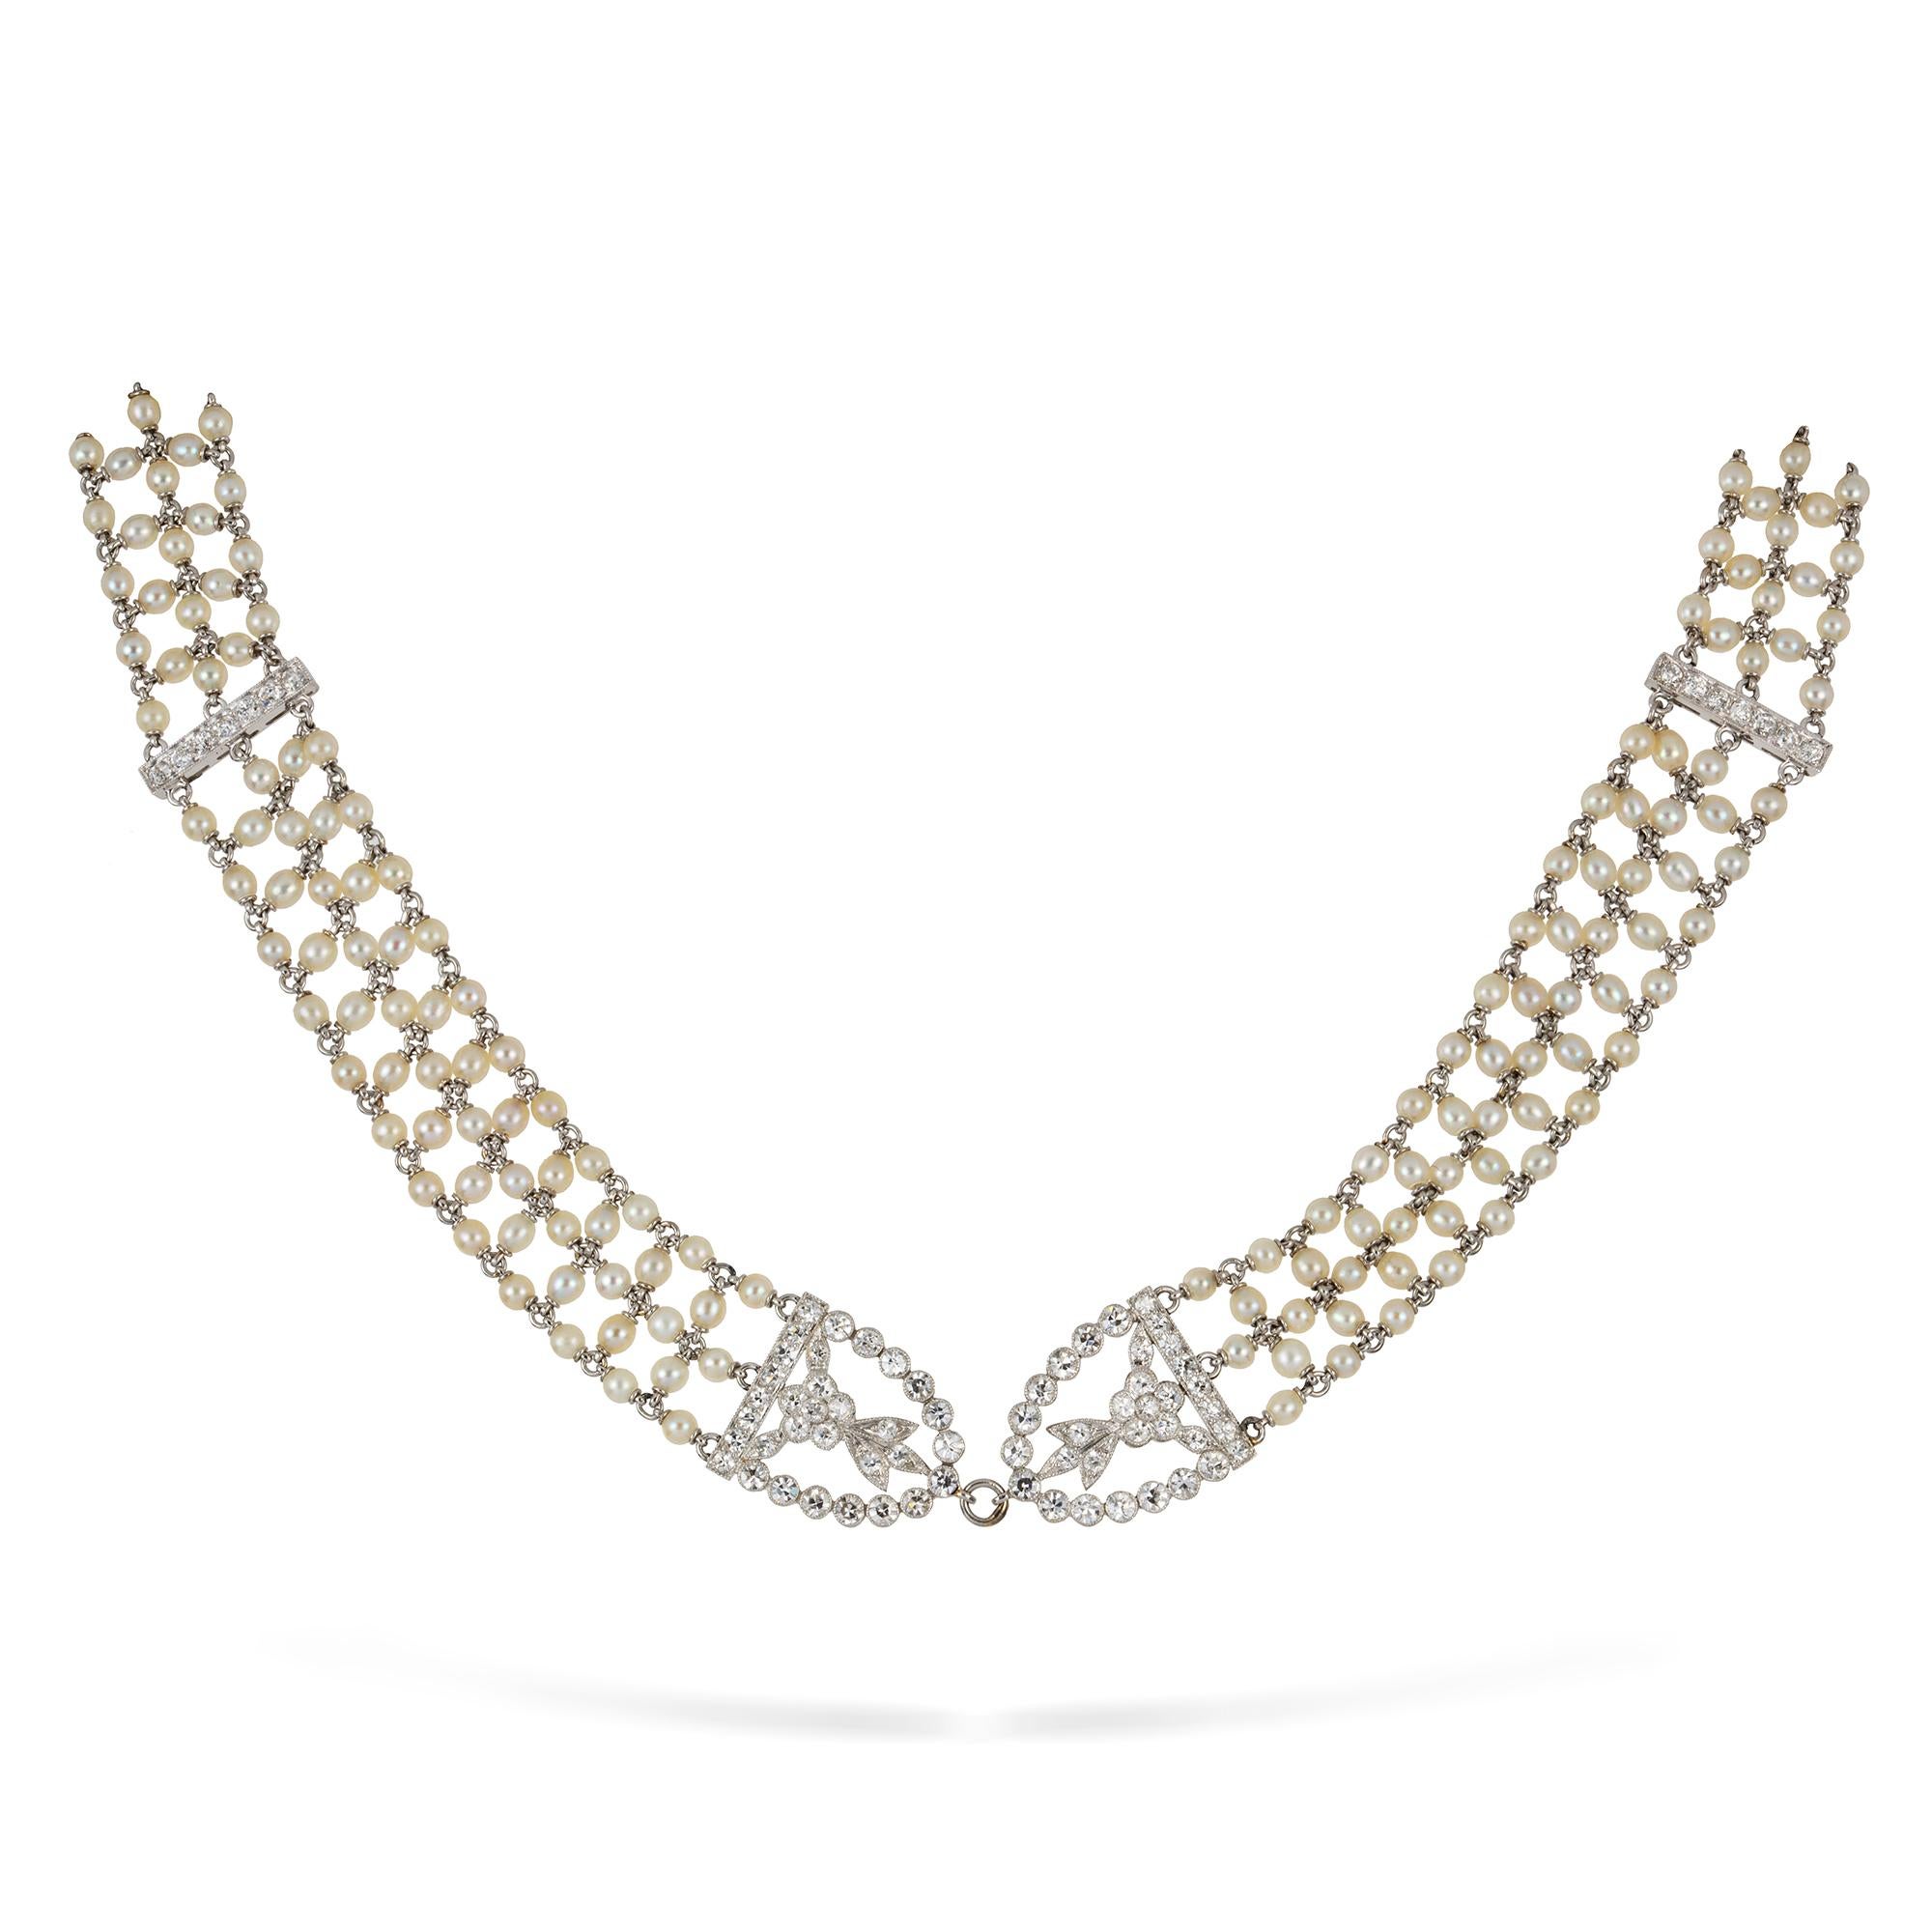 An early twentieth century seed pearl and diamond choker, the seed pearls woven into latticed ribbon measuring 1.3cms in width with a decorative openwork palmette and floral designs to each side with mixed cut diamonds mounted in platinum millegrain